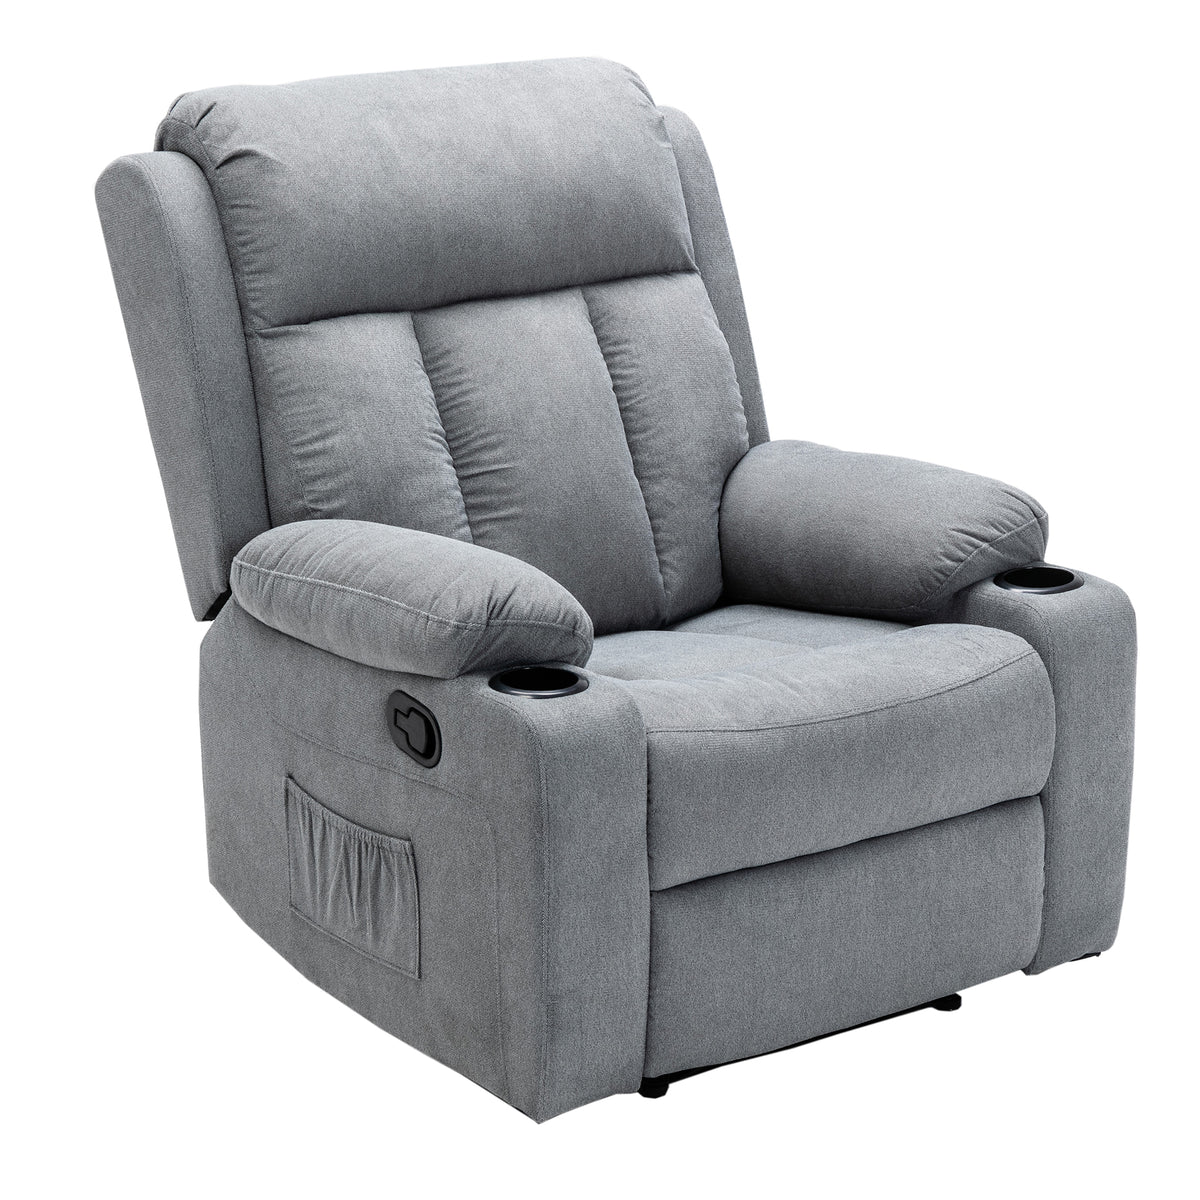 Lexi Recliner Armchair in Grey, Model CR-2032, Comfortable Seating Furniture8